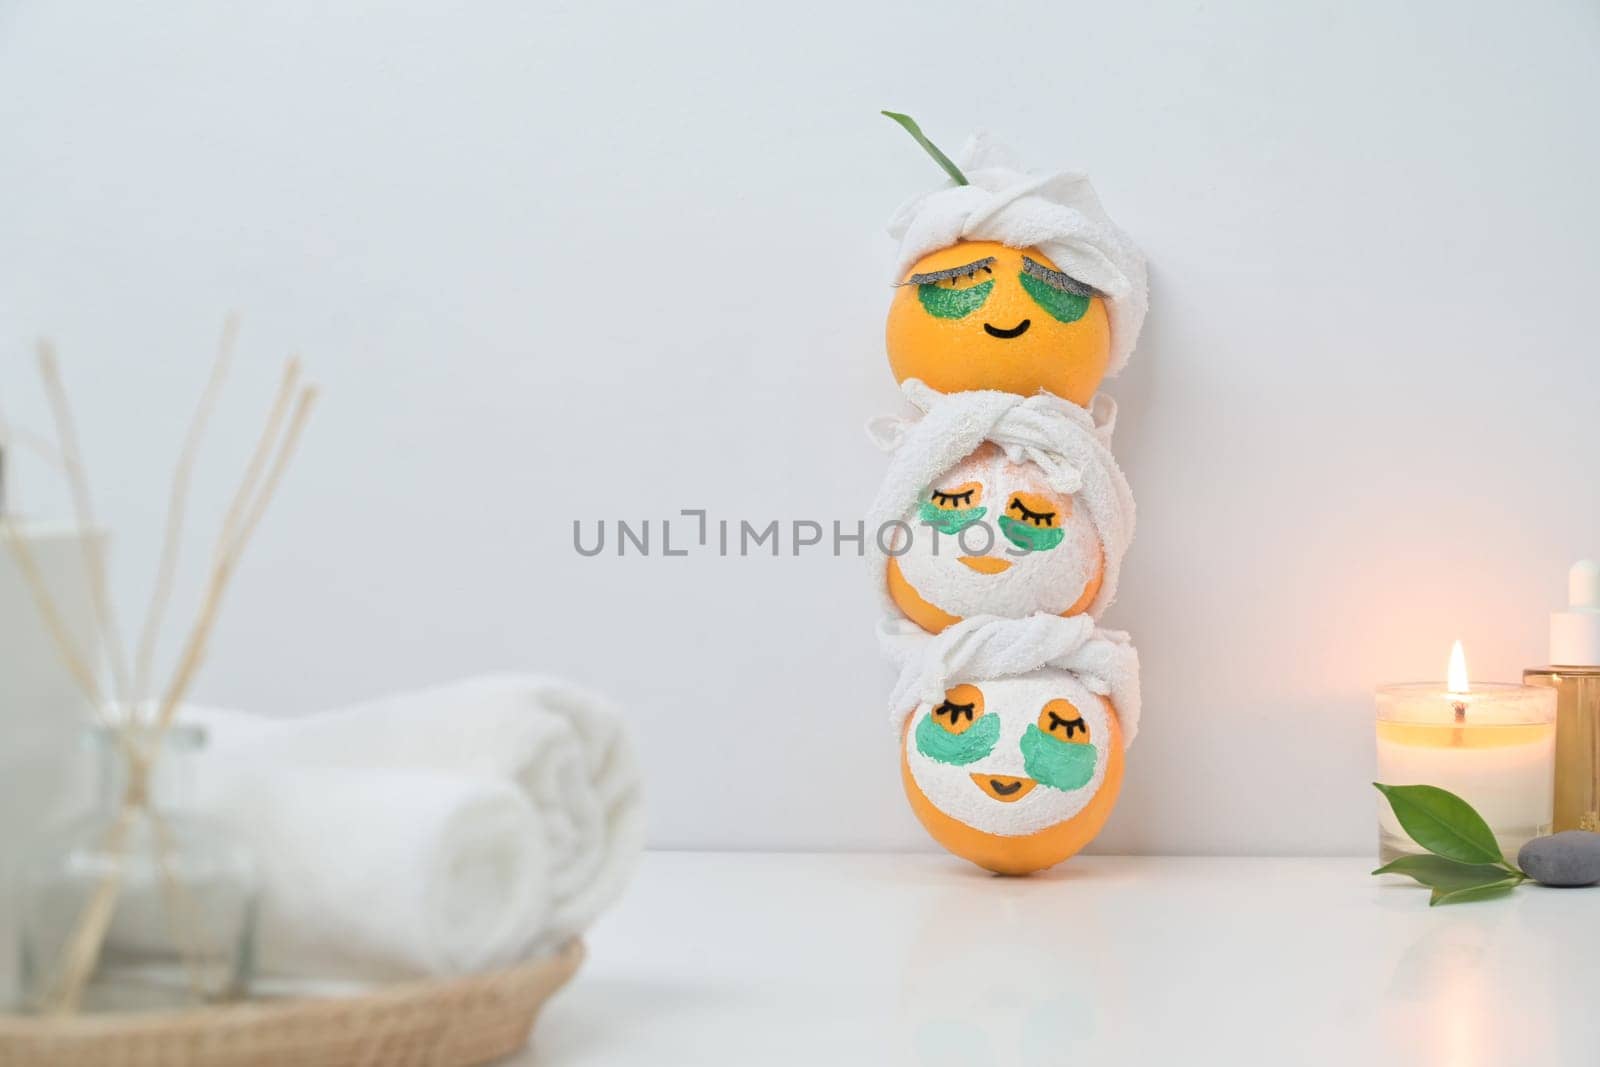 Three orange fruits in face mask near candle on white table. Spa treatment and self care concept.